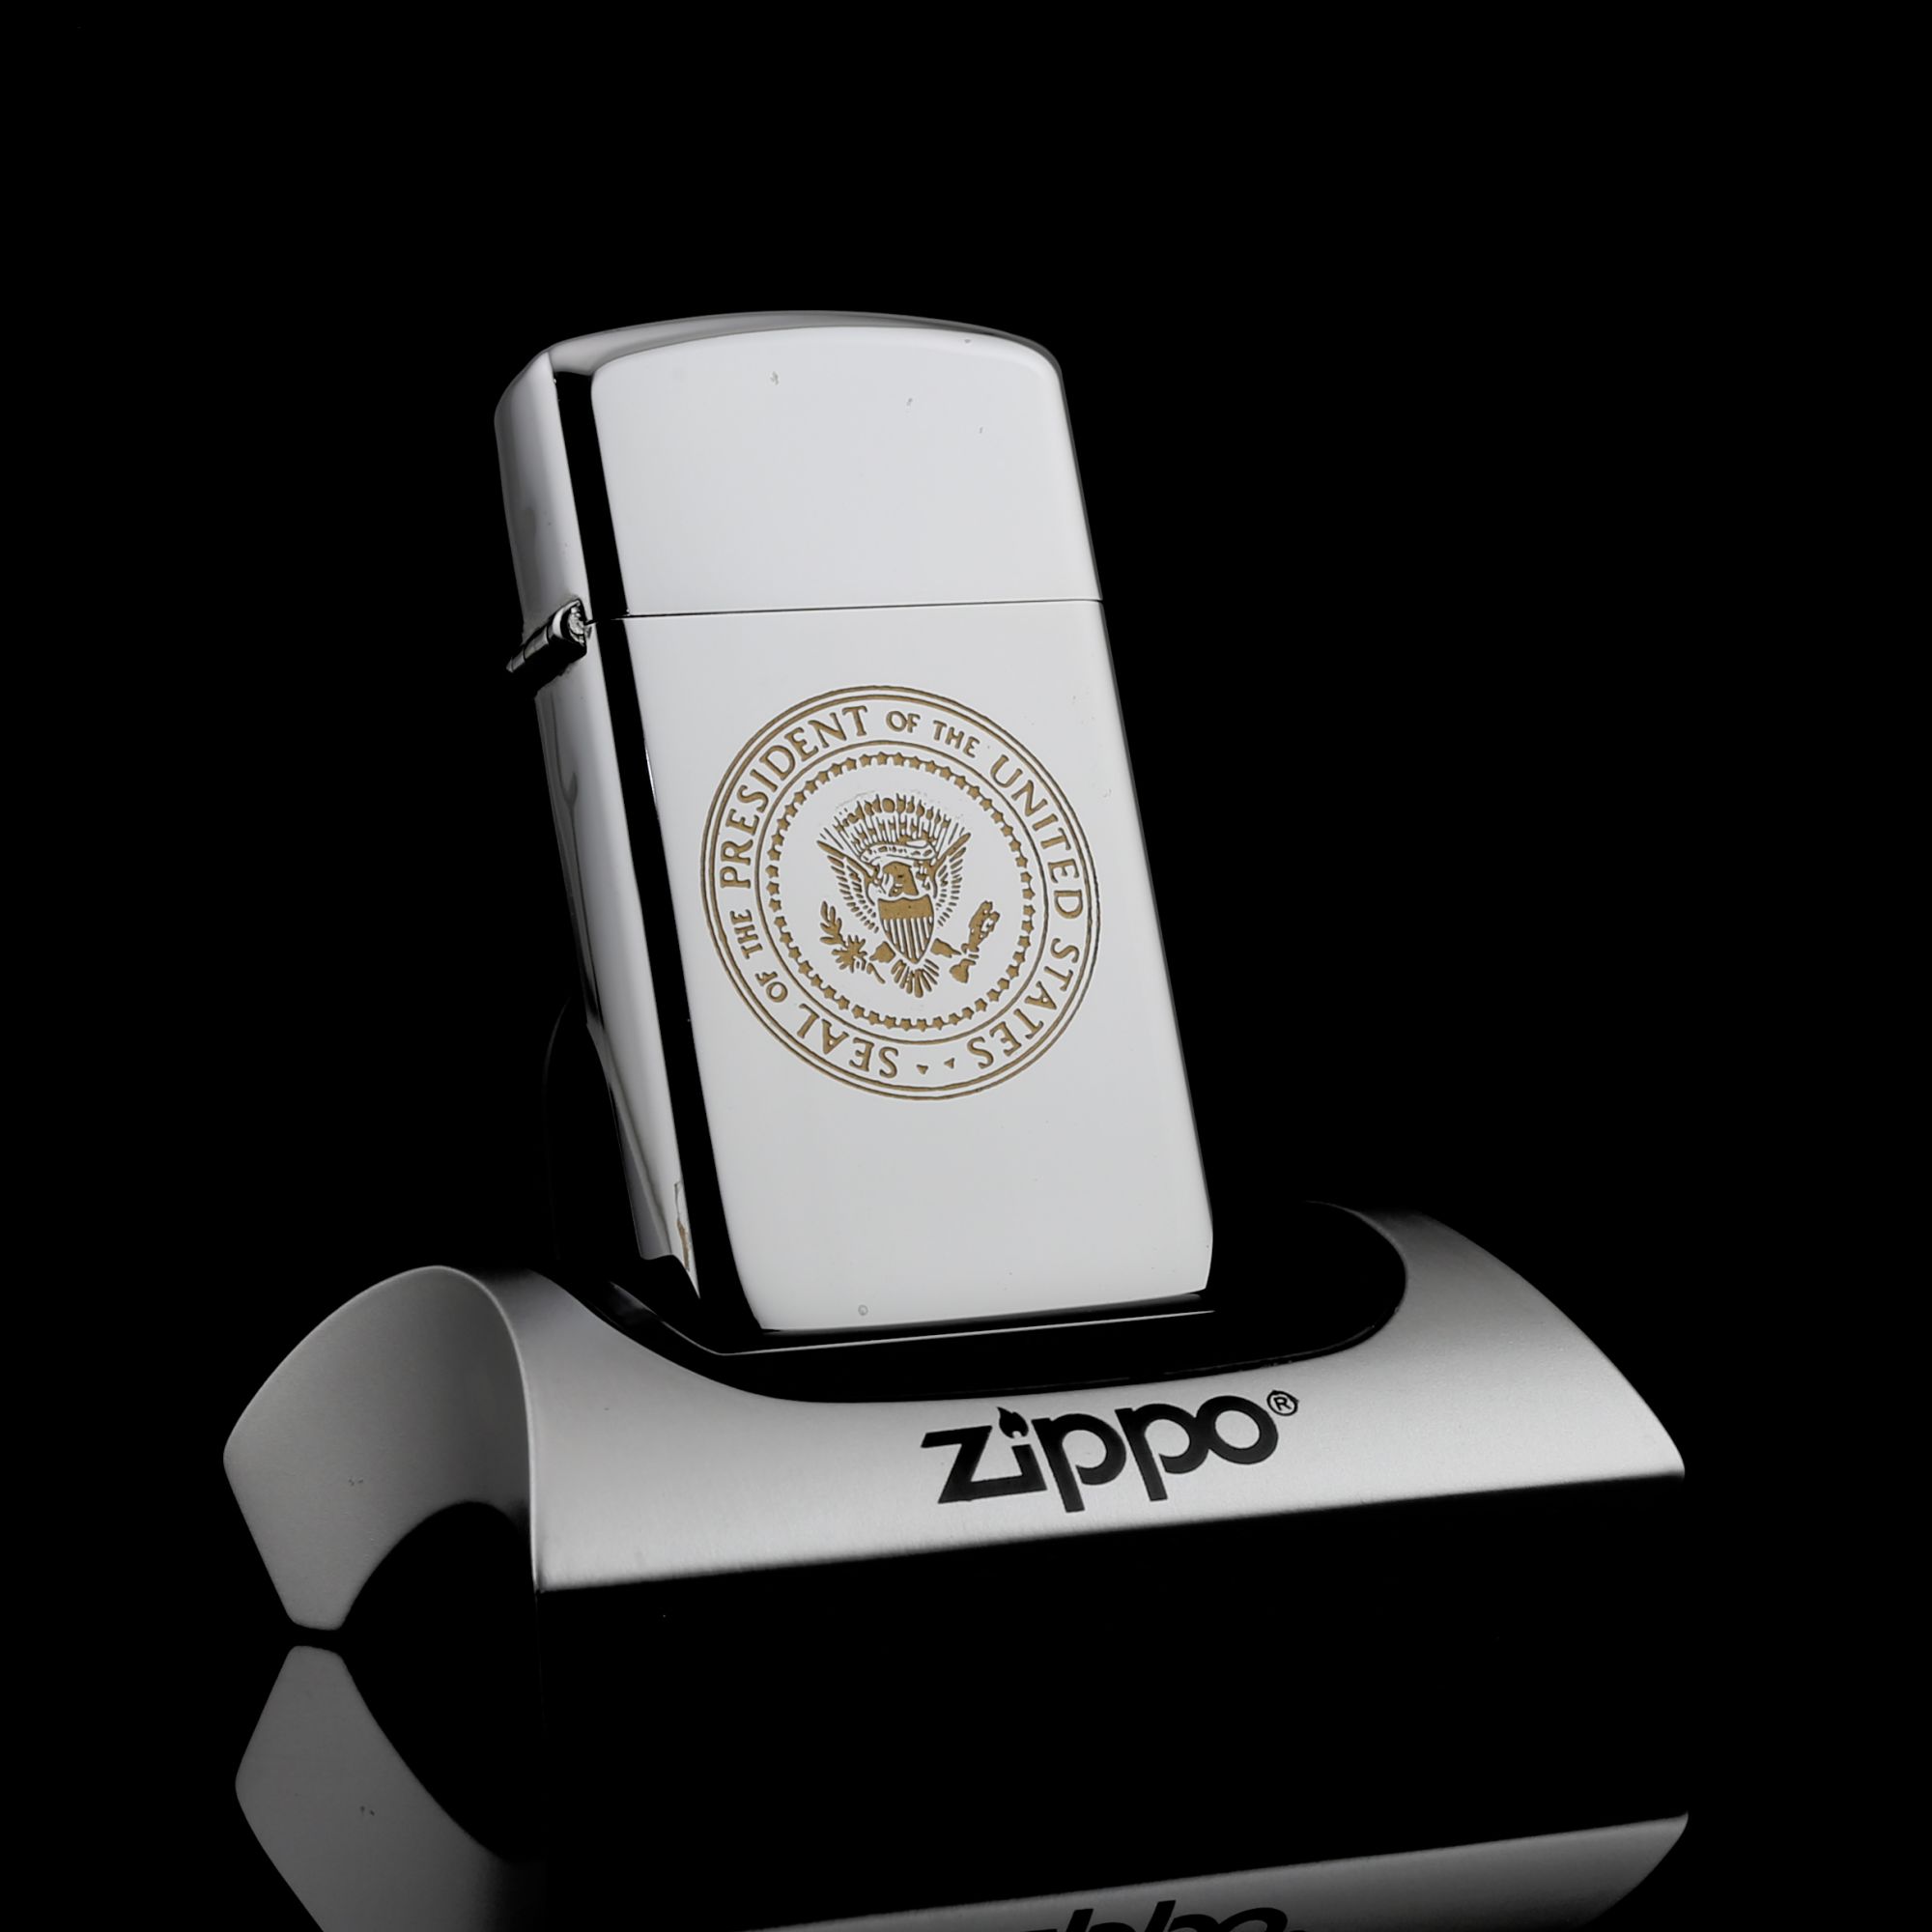 Zippo-GOLD-LOGO-SEAL-of-the-PRESIDENT-of-the-UNITED-STATES-1974-limited-